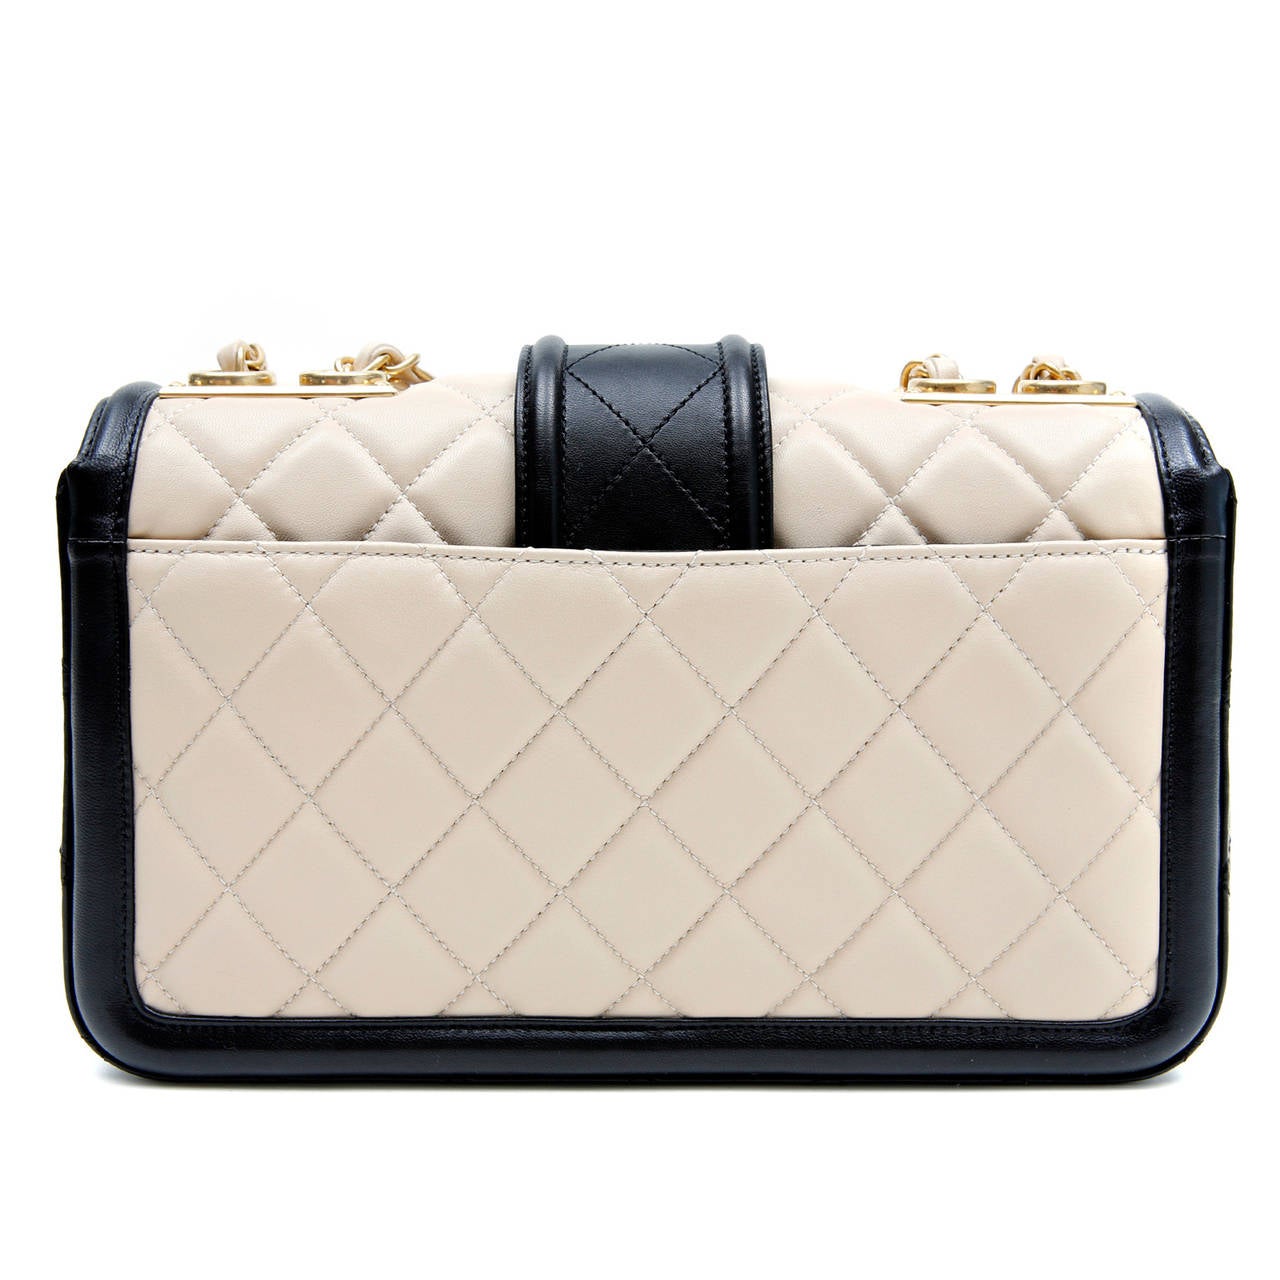 Chanel Beige and Black Leather Flap Bag- PRISTINE; never carried. 

 The sophisticated silhouette is perfectly scaled in the medium size.  Very versatile, it is certain to become a favorite in any collection.
 
Light beige  leather is quilted in